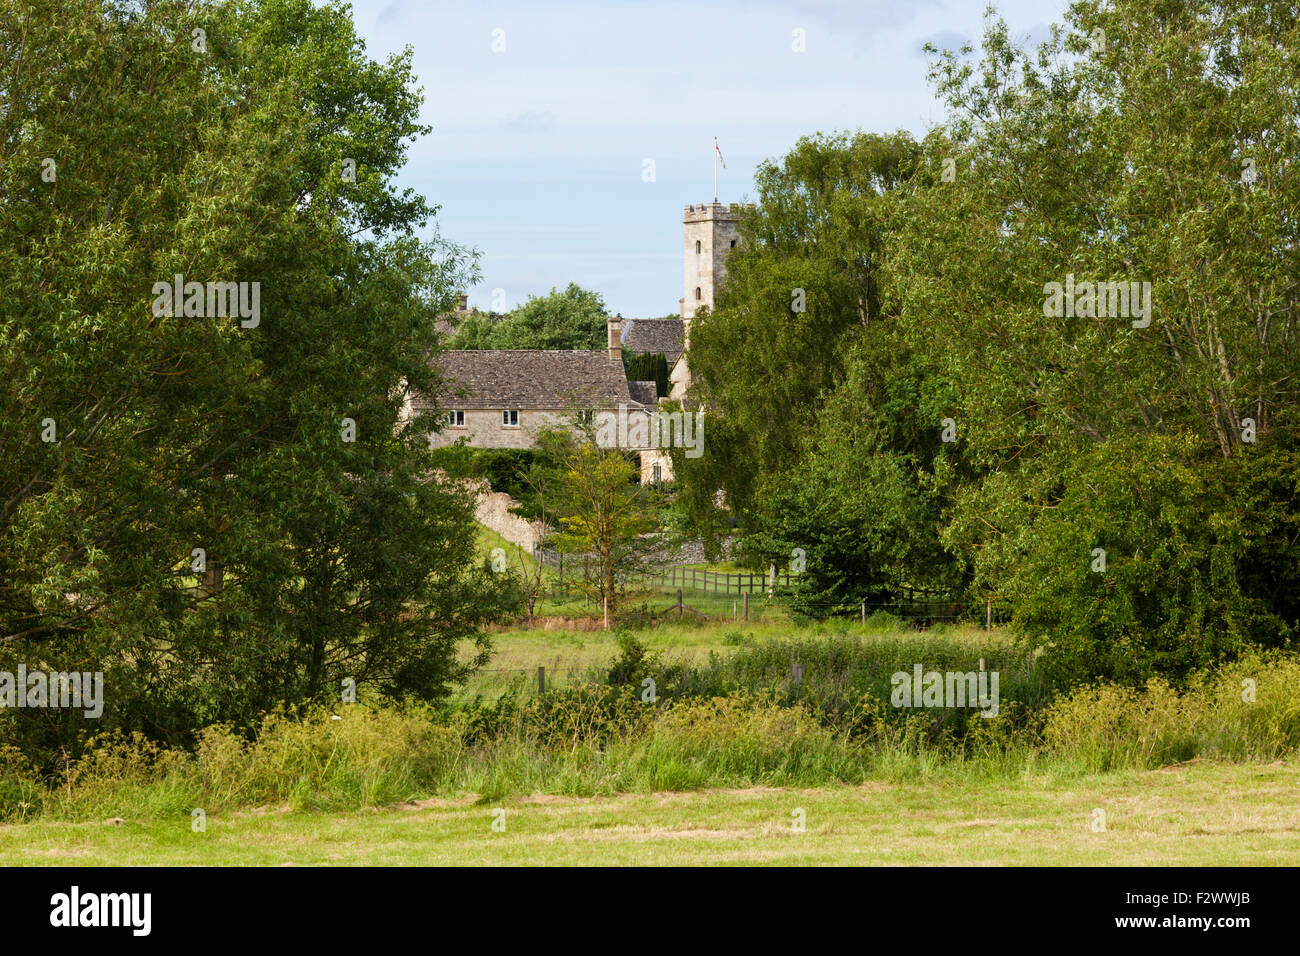 A glimpse of the Cotswold village of Swinbrook, Oxfordshire UK beside the River Windrush Stock Photo